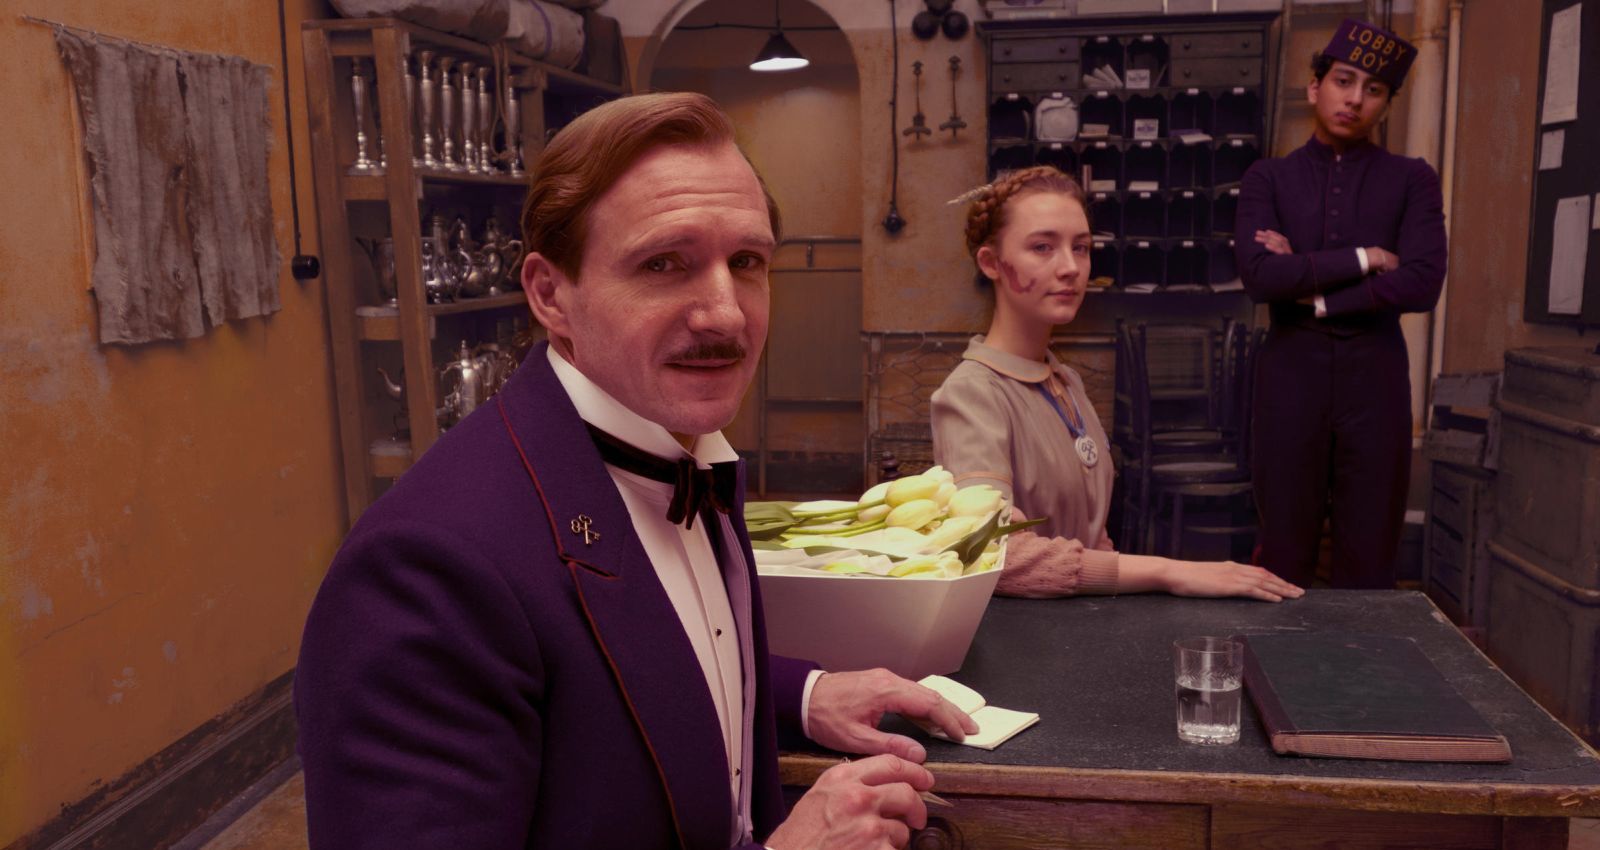 Wes Anderson The Grand Budapest Hotel Ralph Fiennes Saoirse Ronan